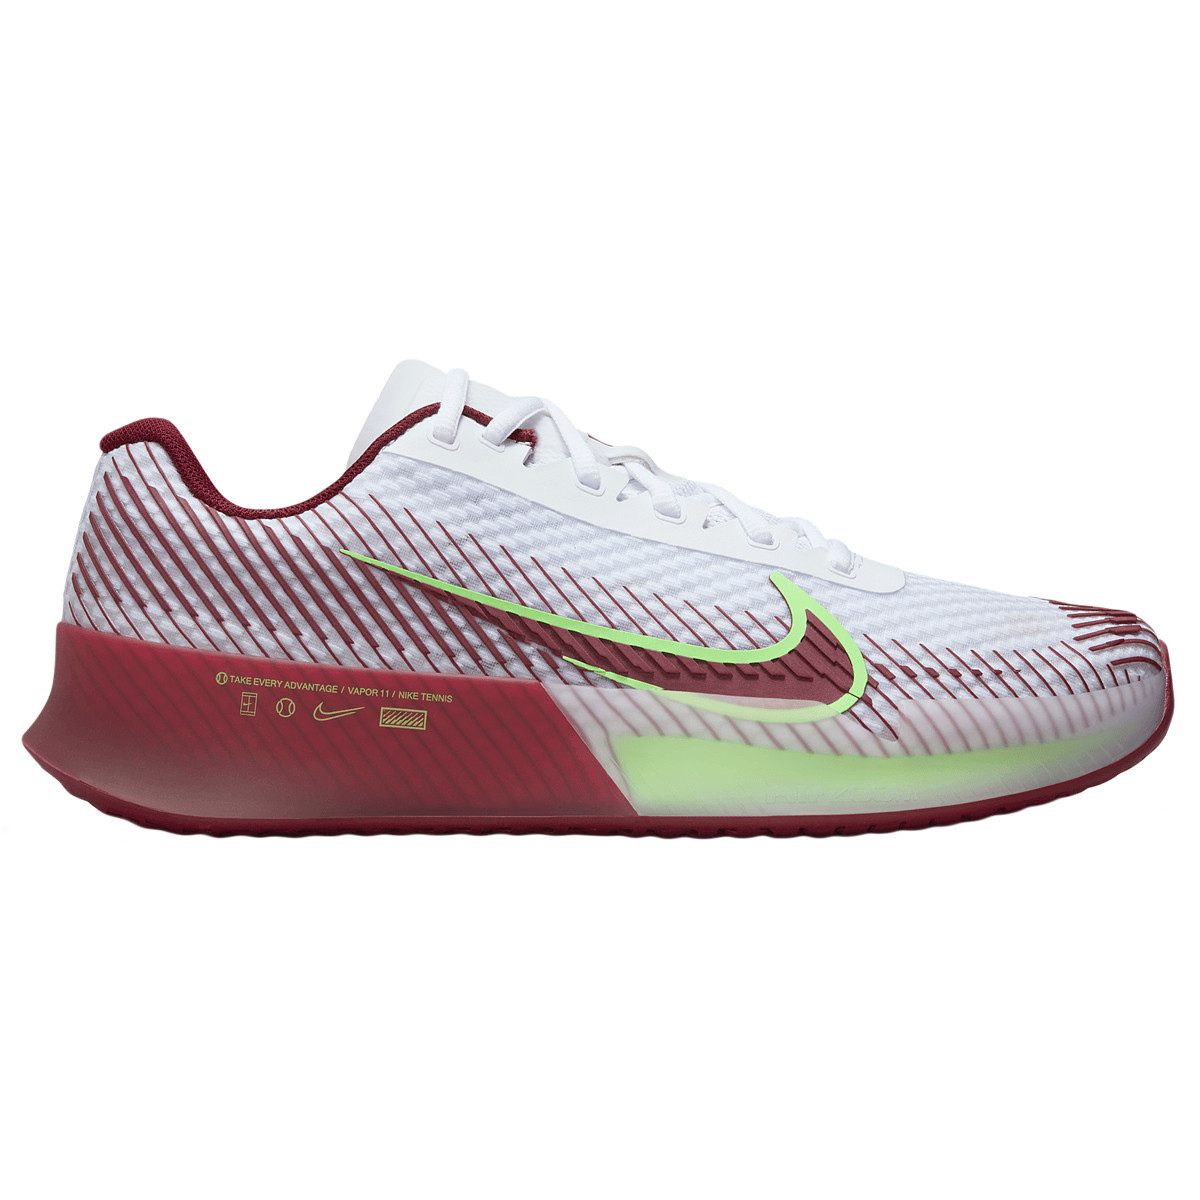 CHAUSSURES NIKE COURT ZOOM PRO ROME SURFACES DURES - NIKE - Homme -  Chaussures